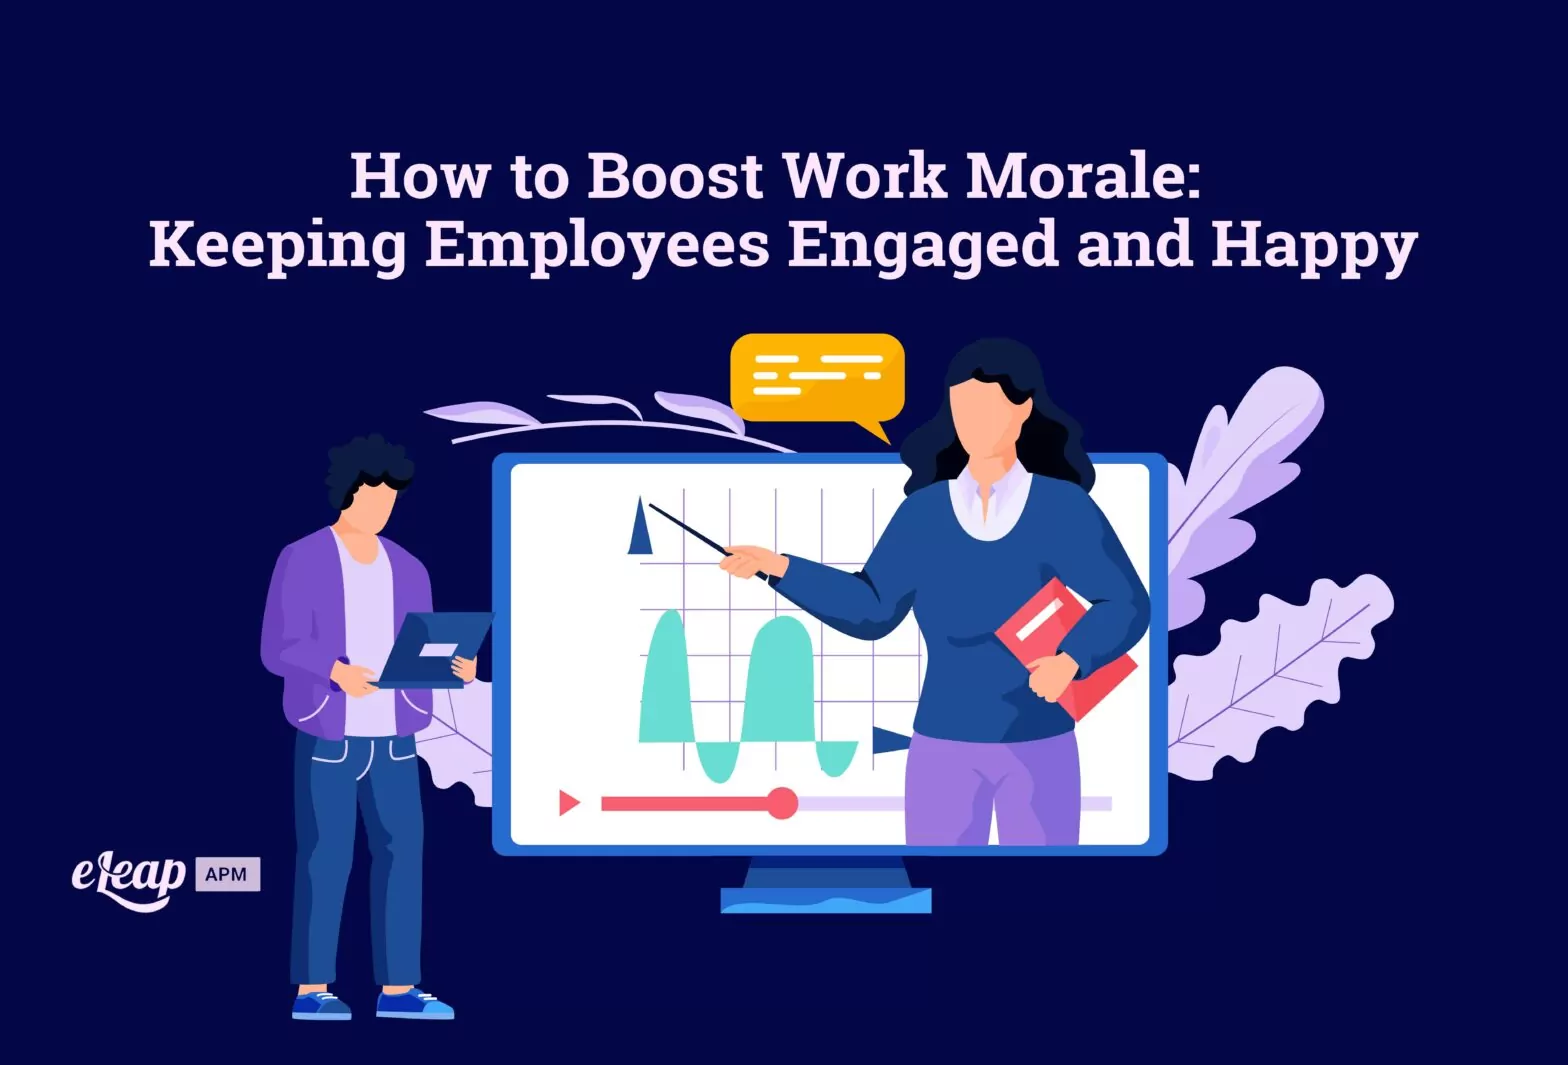 How to Boost Work Morale: Keeping Employees Engaged and Happy